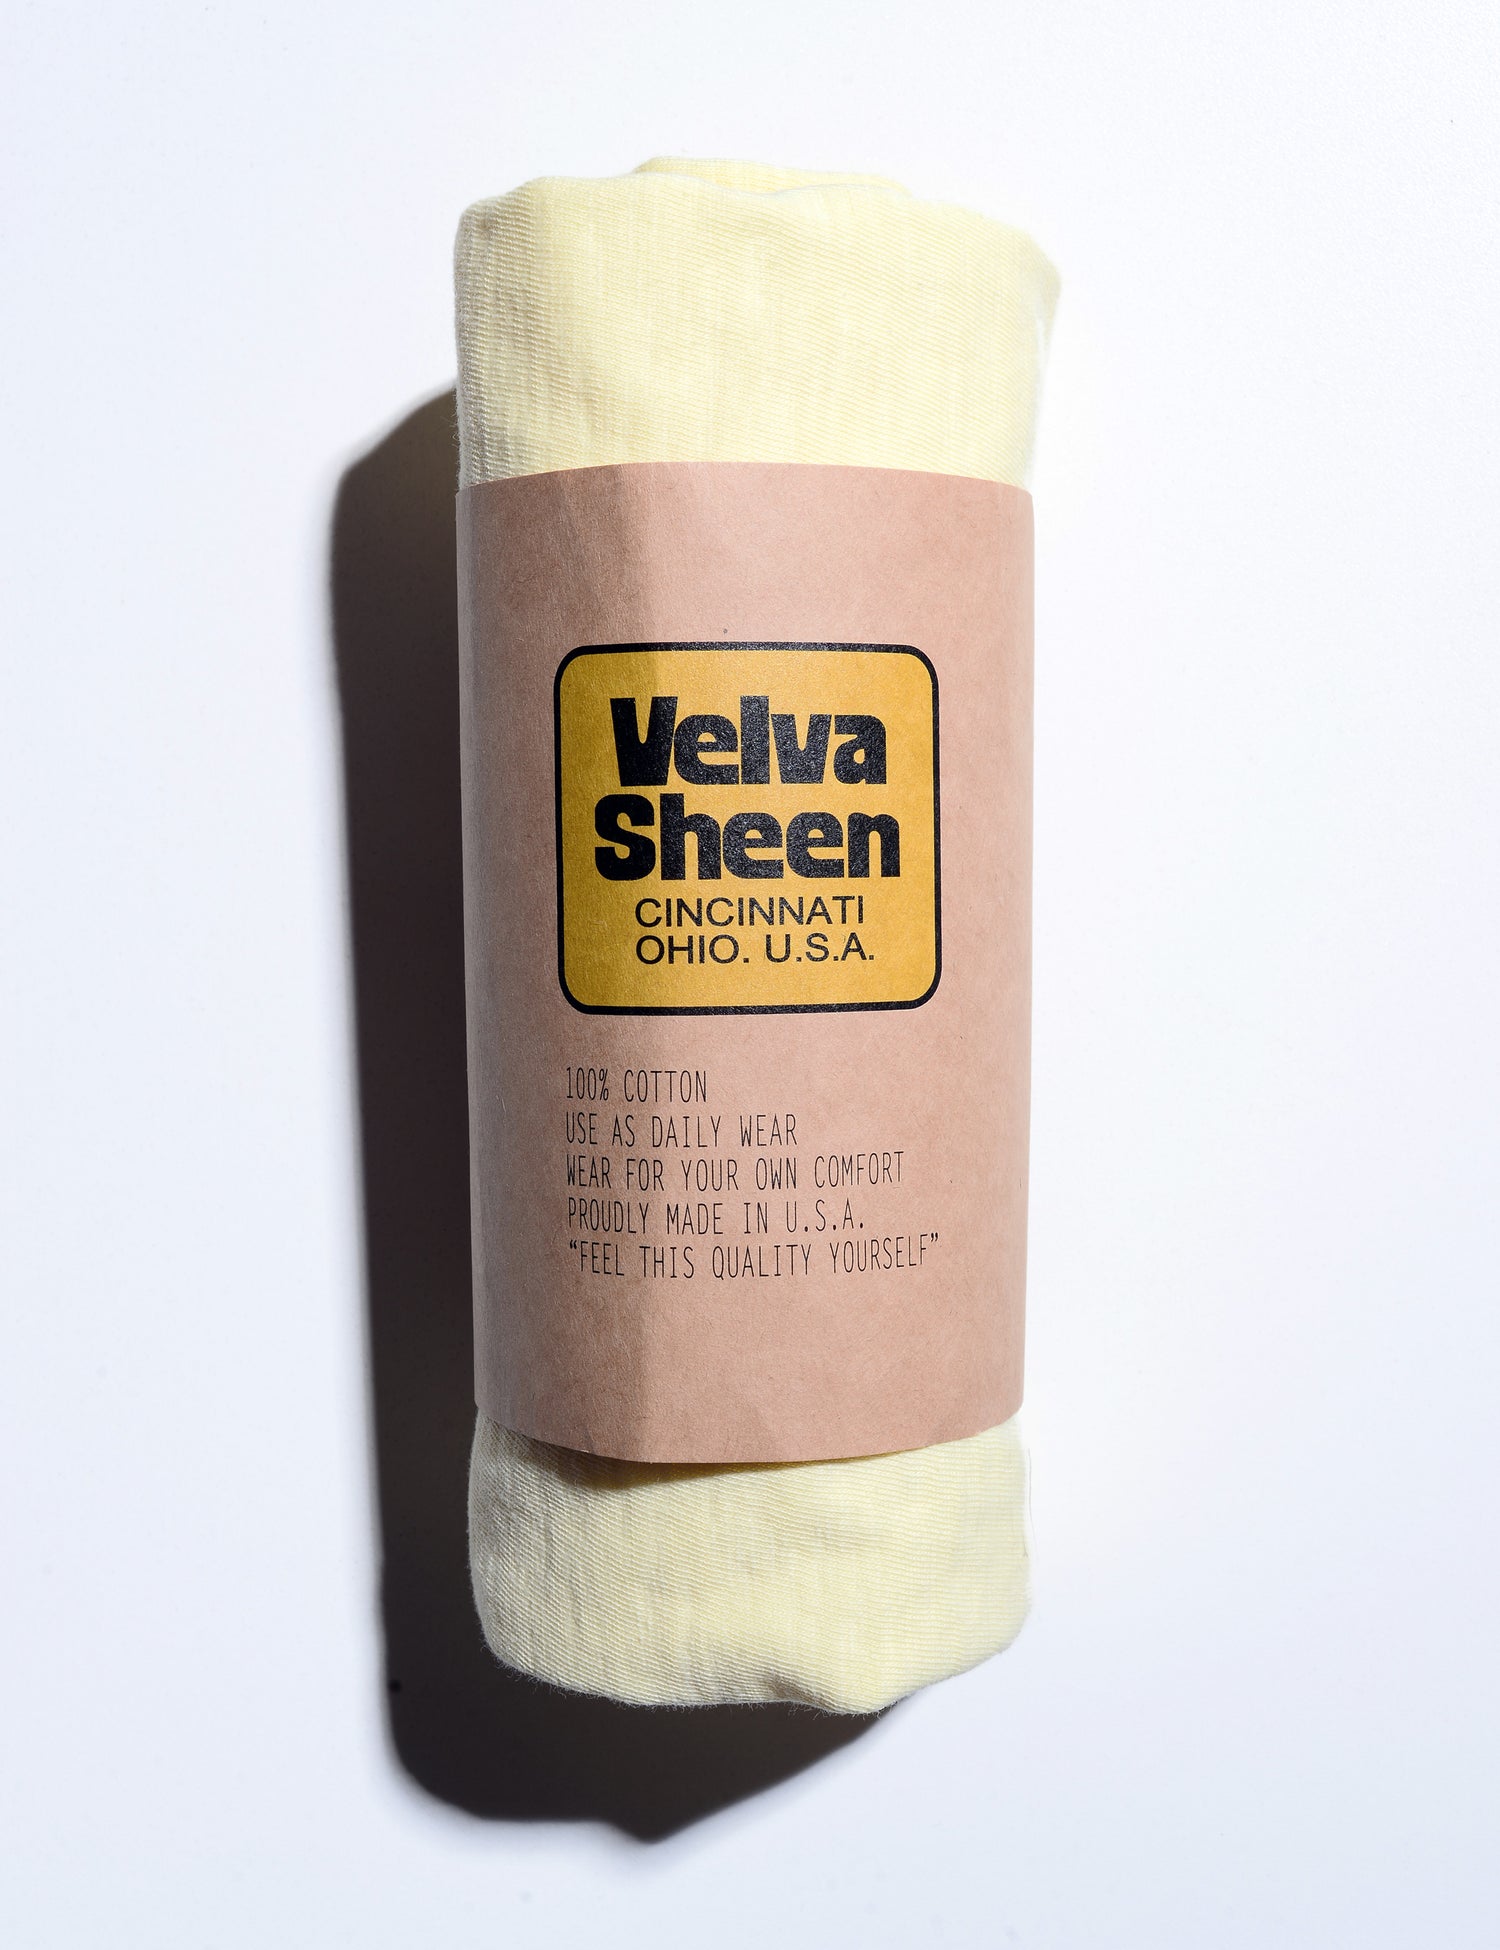 Photo of Velva Sheen Crewneck T-Shirt in Sunshine rolled in its paper packaging